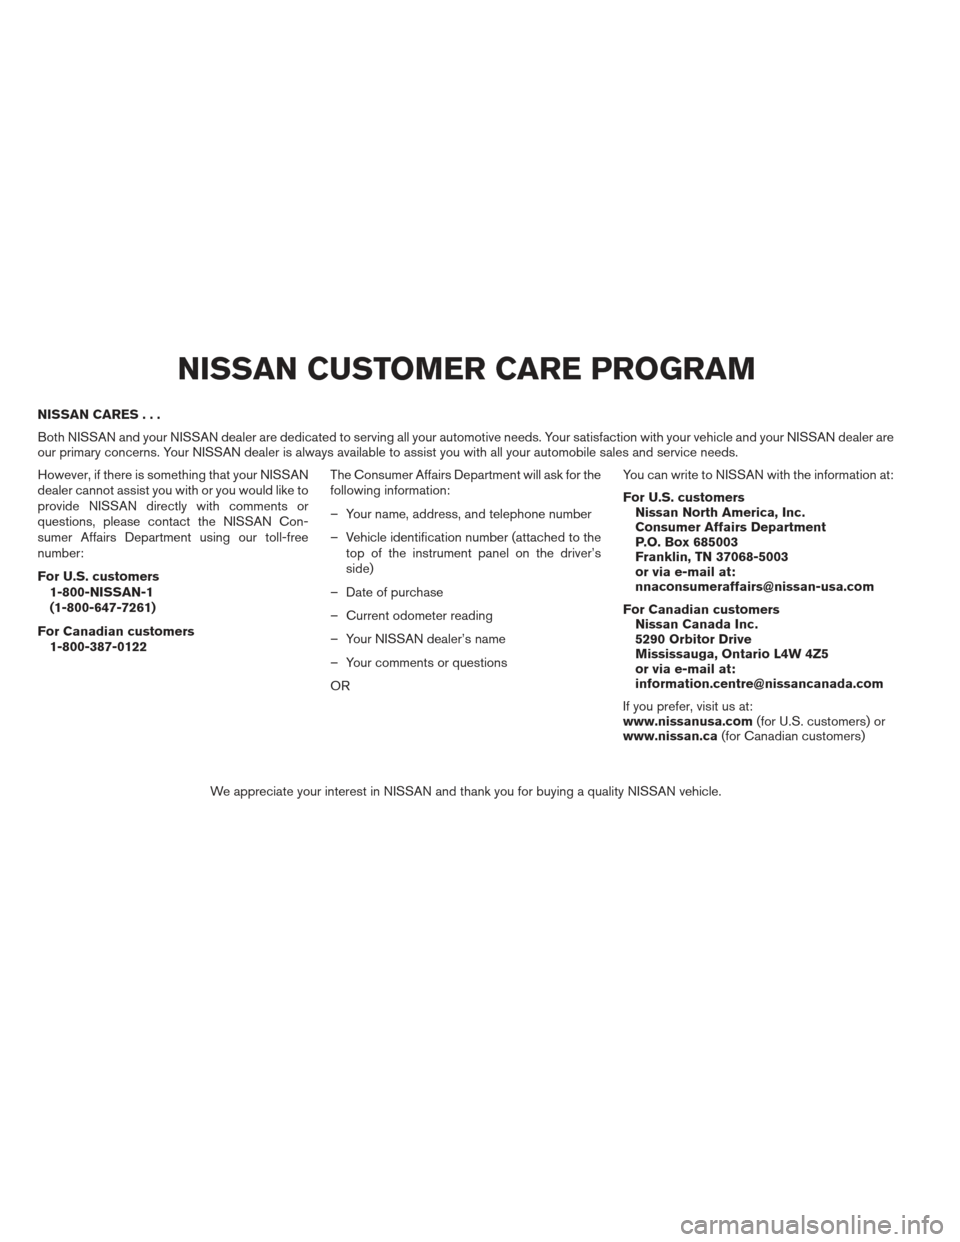 NISSAN XTERRA 2013 N50 / 2.G Owners Manual NISSAN CARES...
Both NISSAN and your NISSAN dealer are dedicated to serving all your automotive needs. Your satisfaction with your vehicle and your NISSAN dealer are
our primary concerns. Your NISSAN 